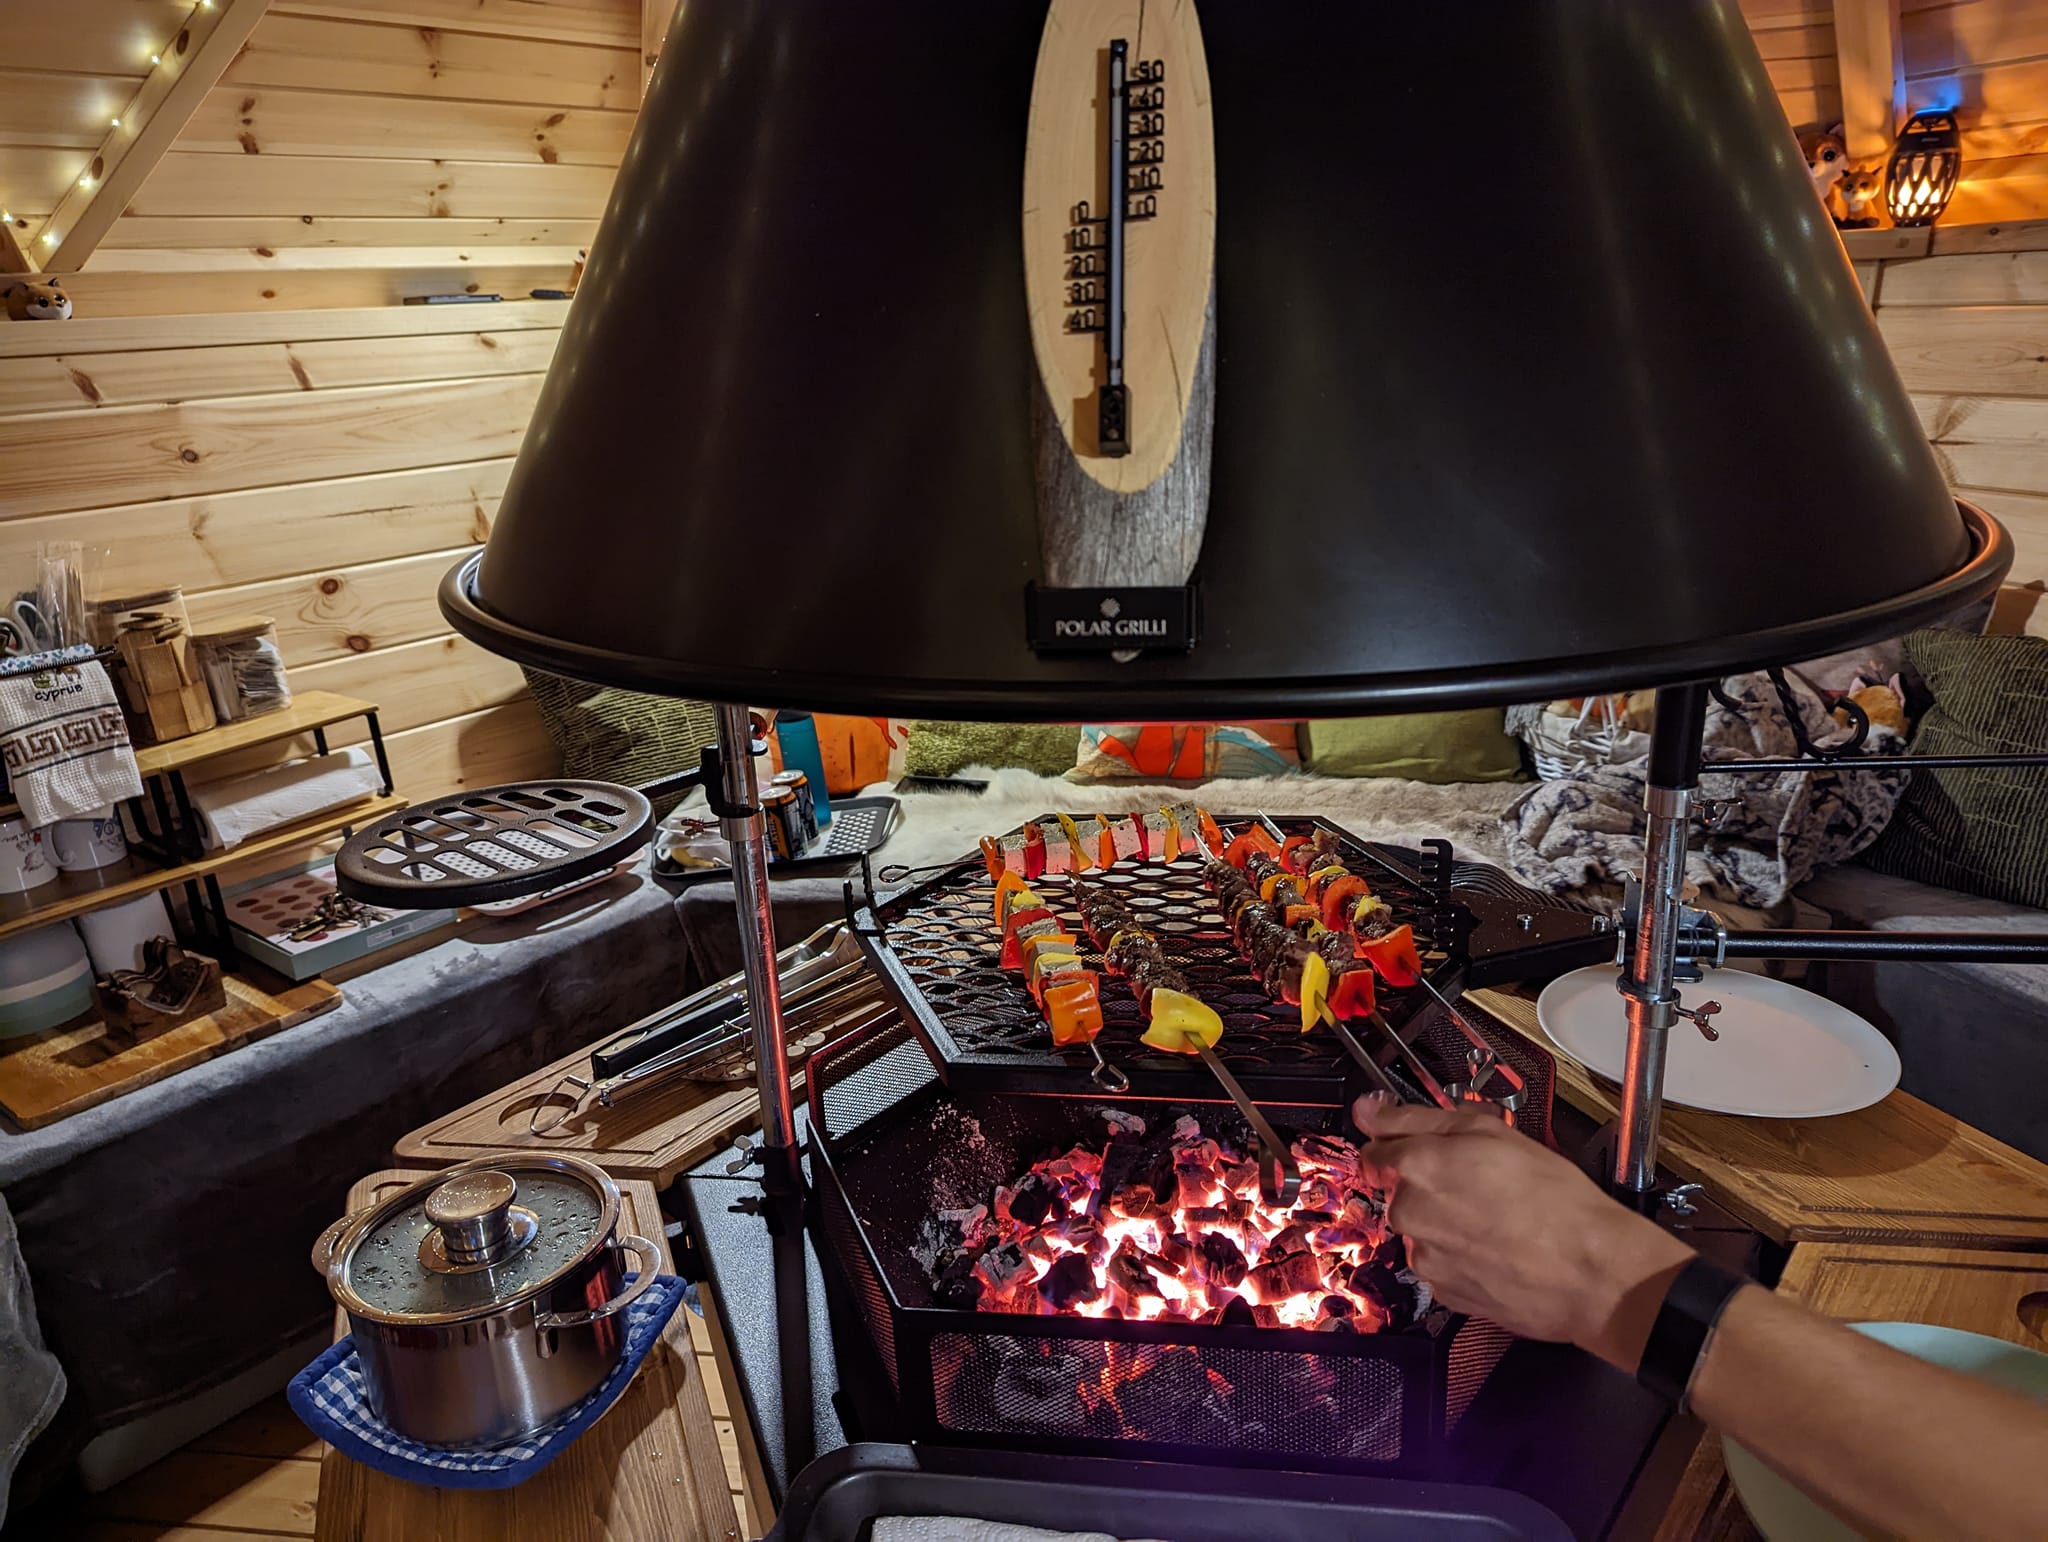 Skewer kebabs sizzling over the grill inside an Arctic Cabin BBQ House